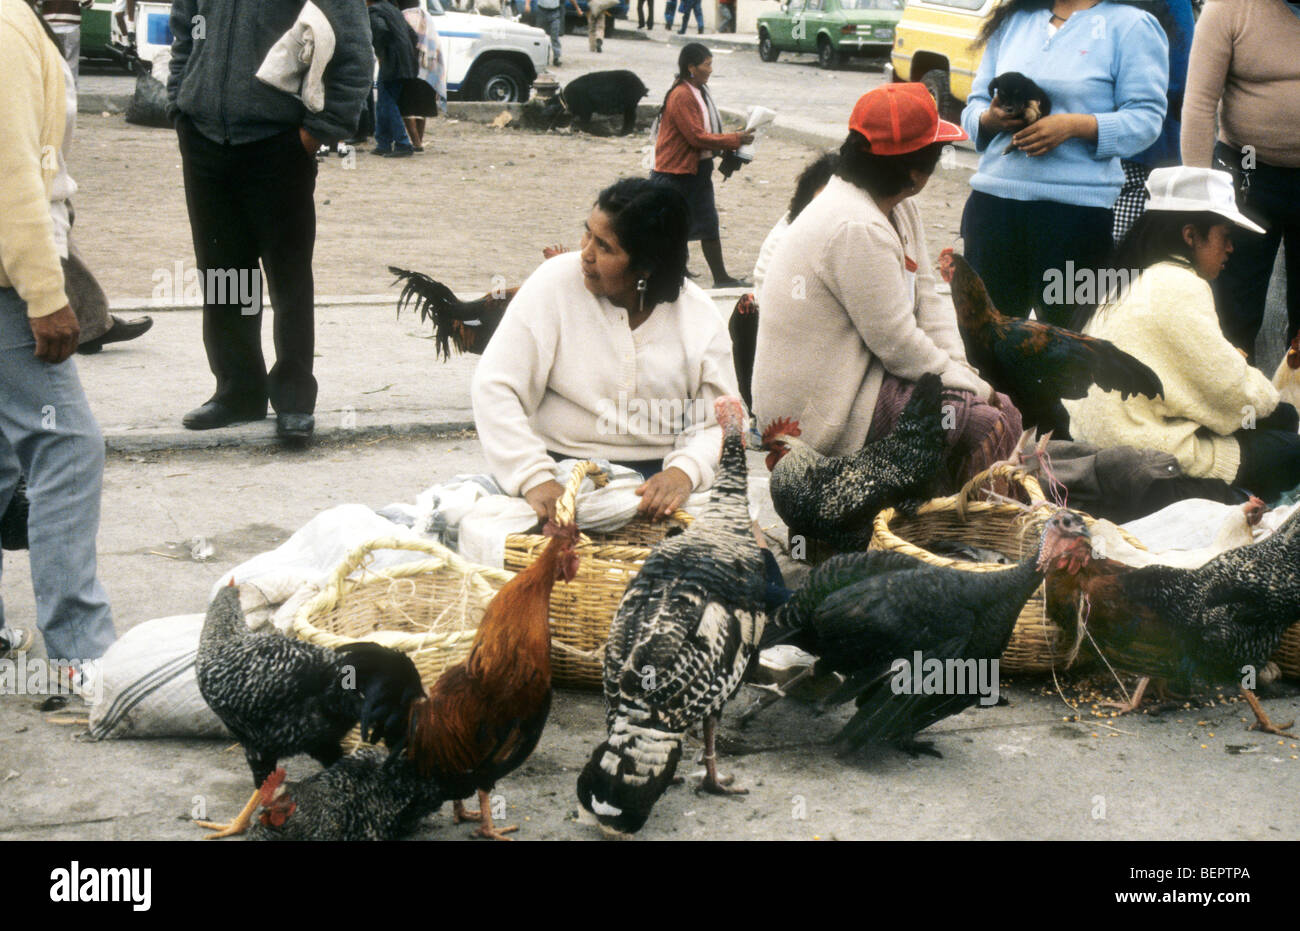 Women selling live chickens in rural Ecuador market Stock Photo